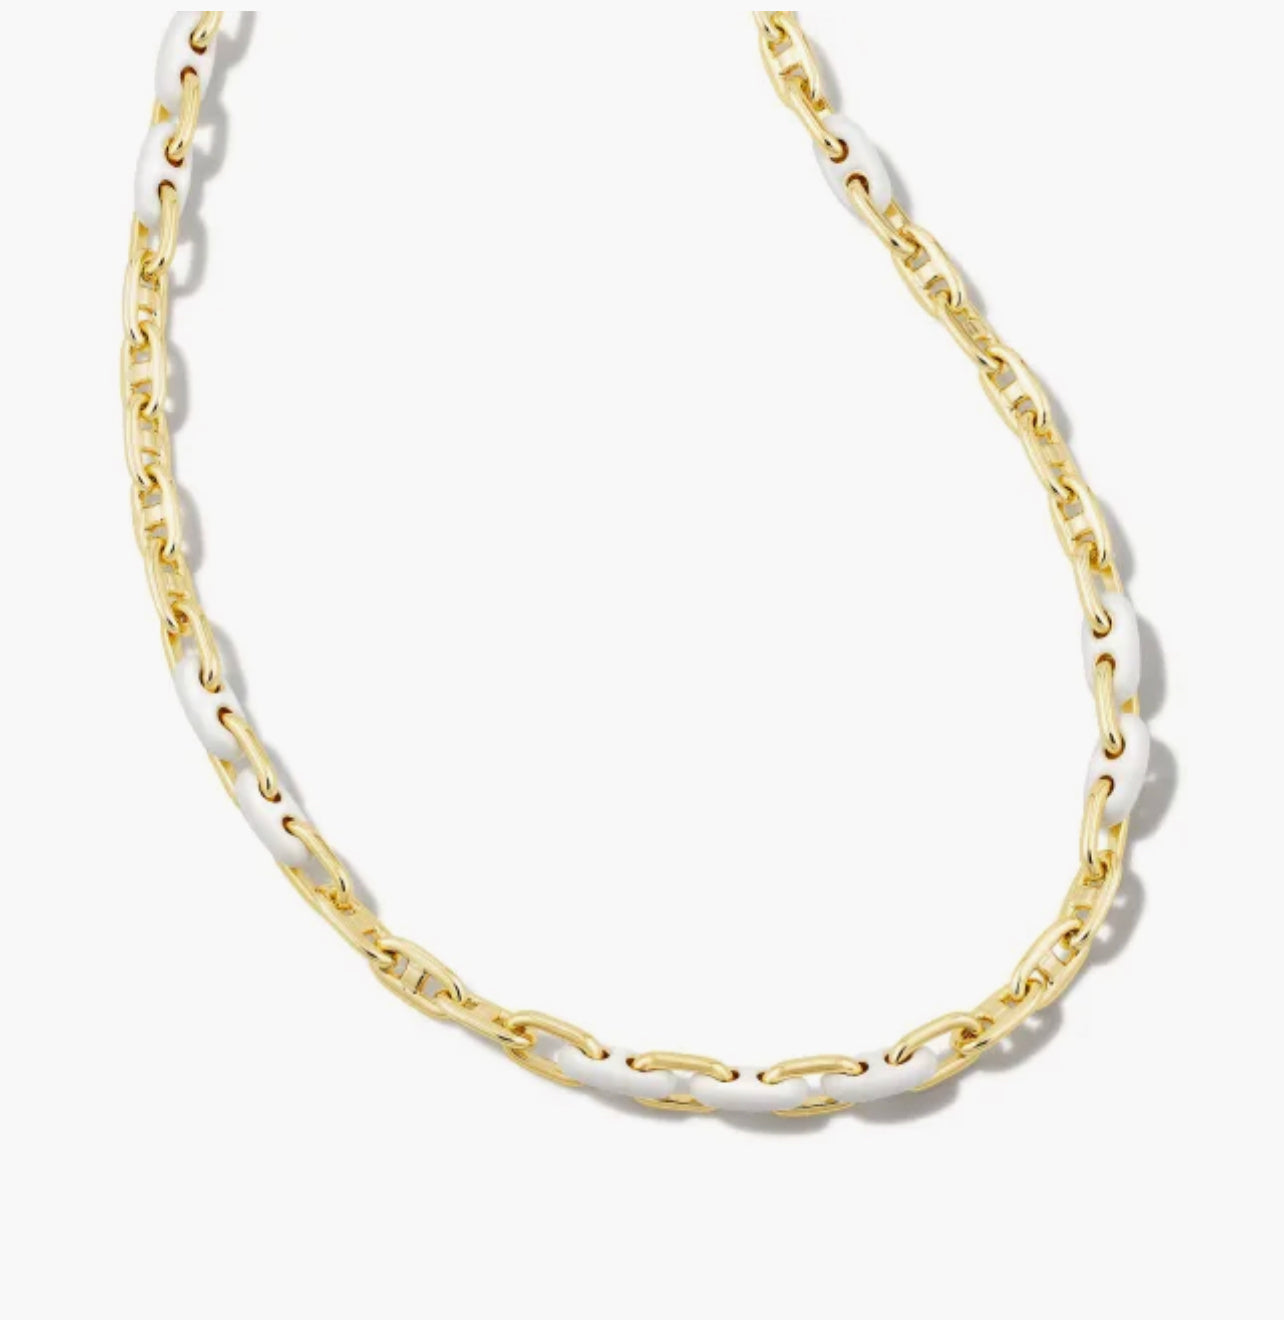 Kendra Scott-Bailey Gold Chain Necklace in White Mix 9608851425